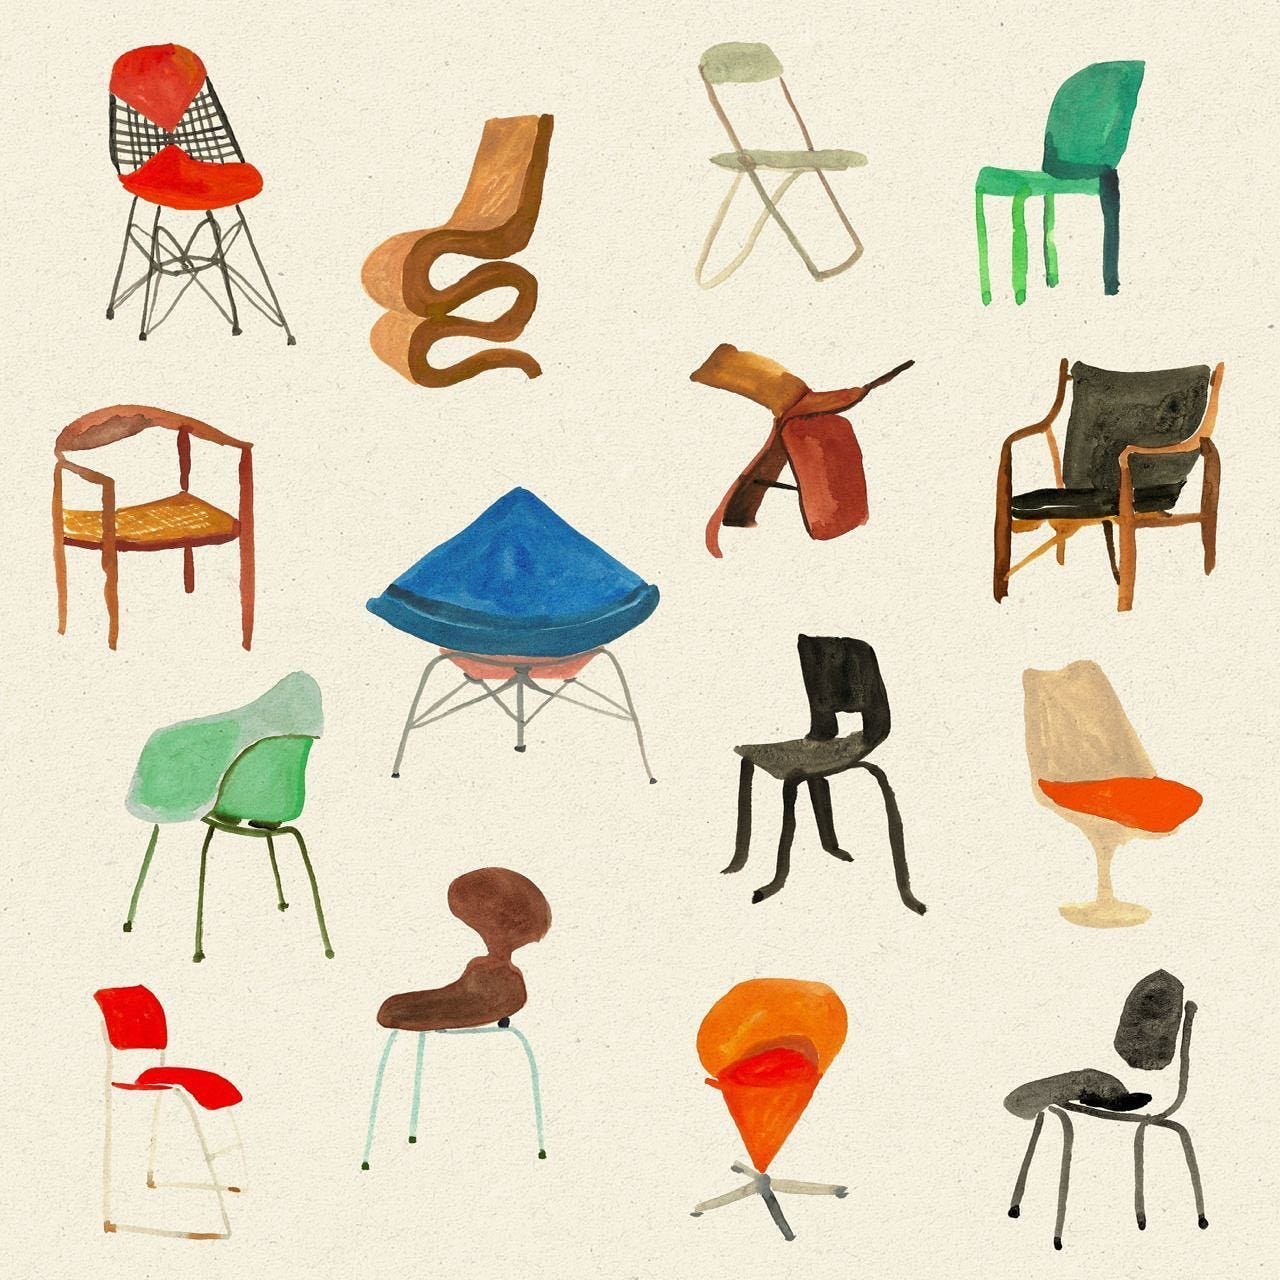 According to art historian Agata Toromanoff, some chairs are made to explore new manufacturing methods or apply certain techniques. Other chairs “serve as a rite of passage,” like credentials for an audience. (image source: nukarisha)